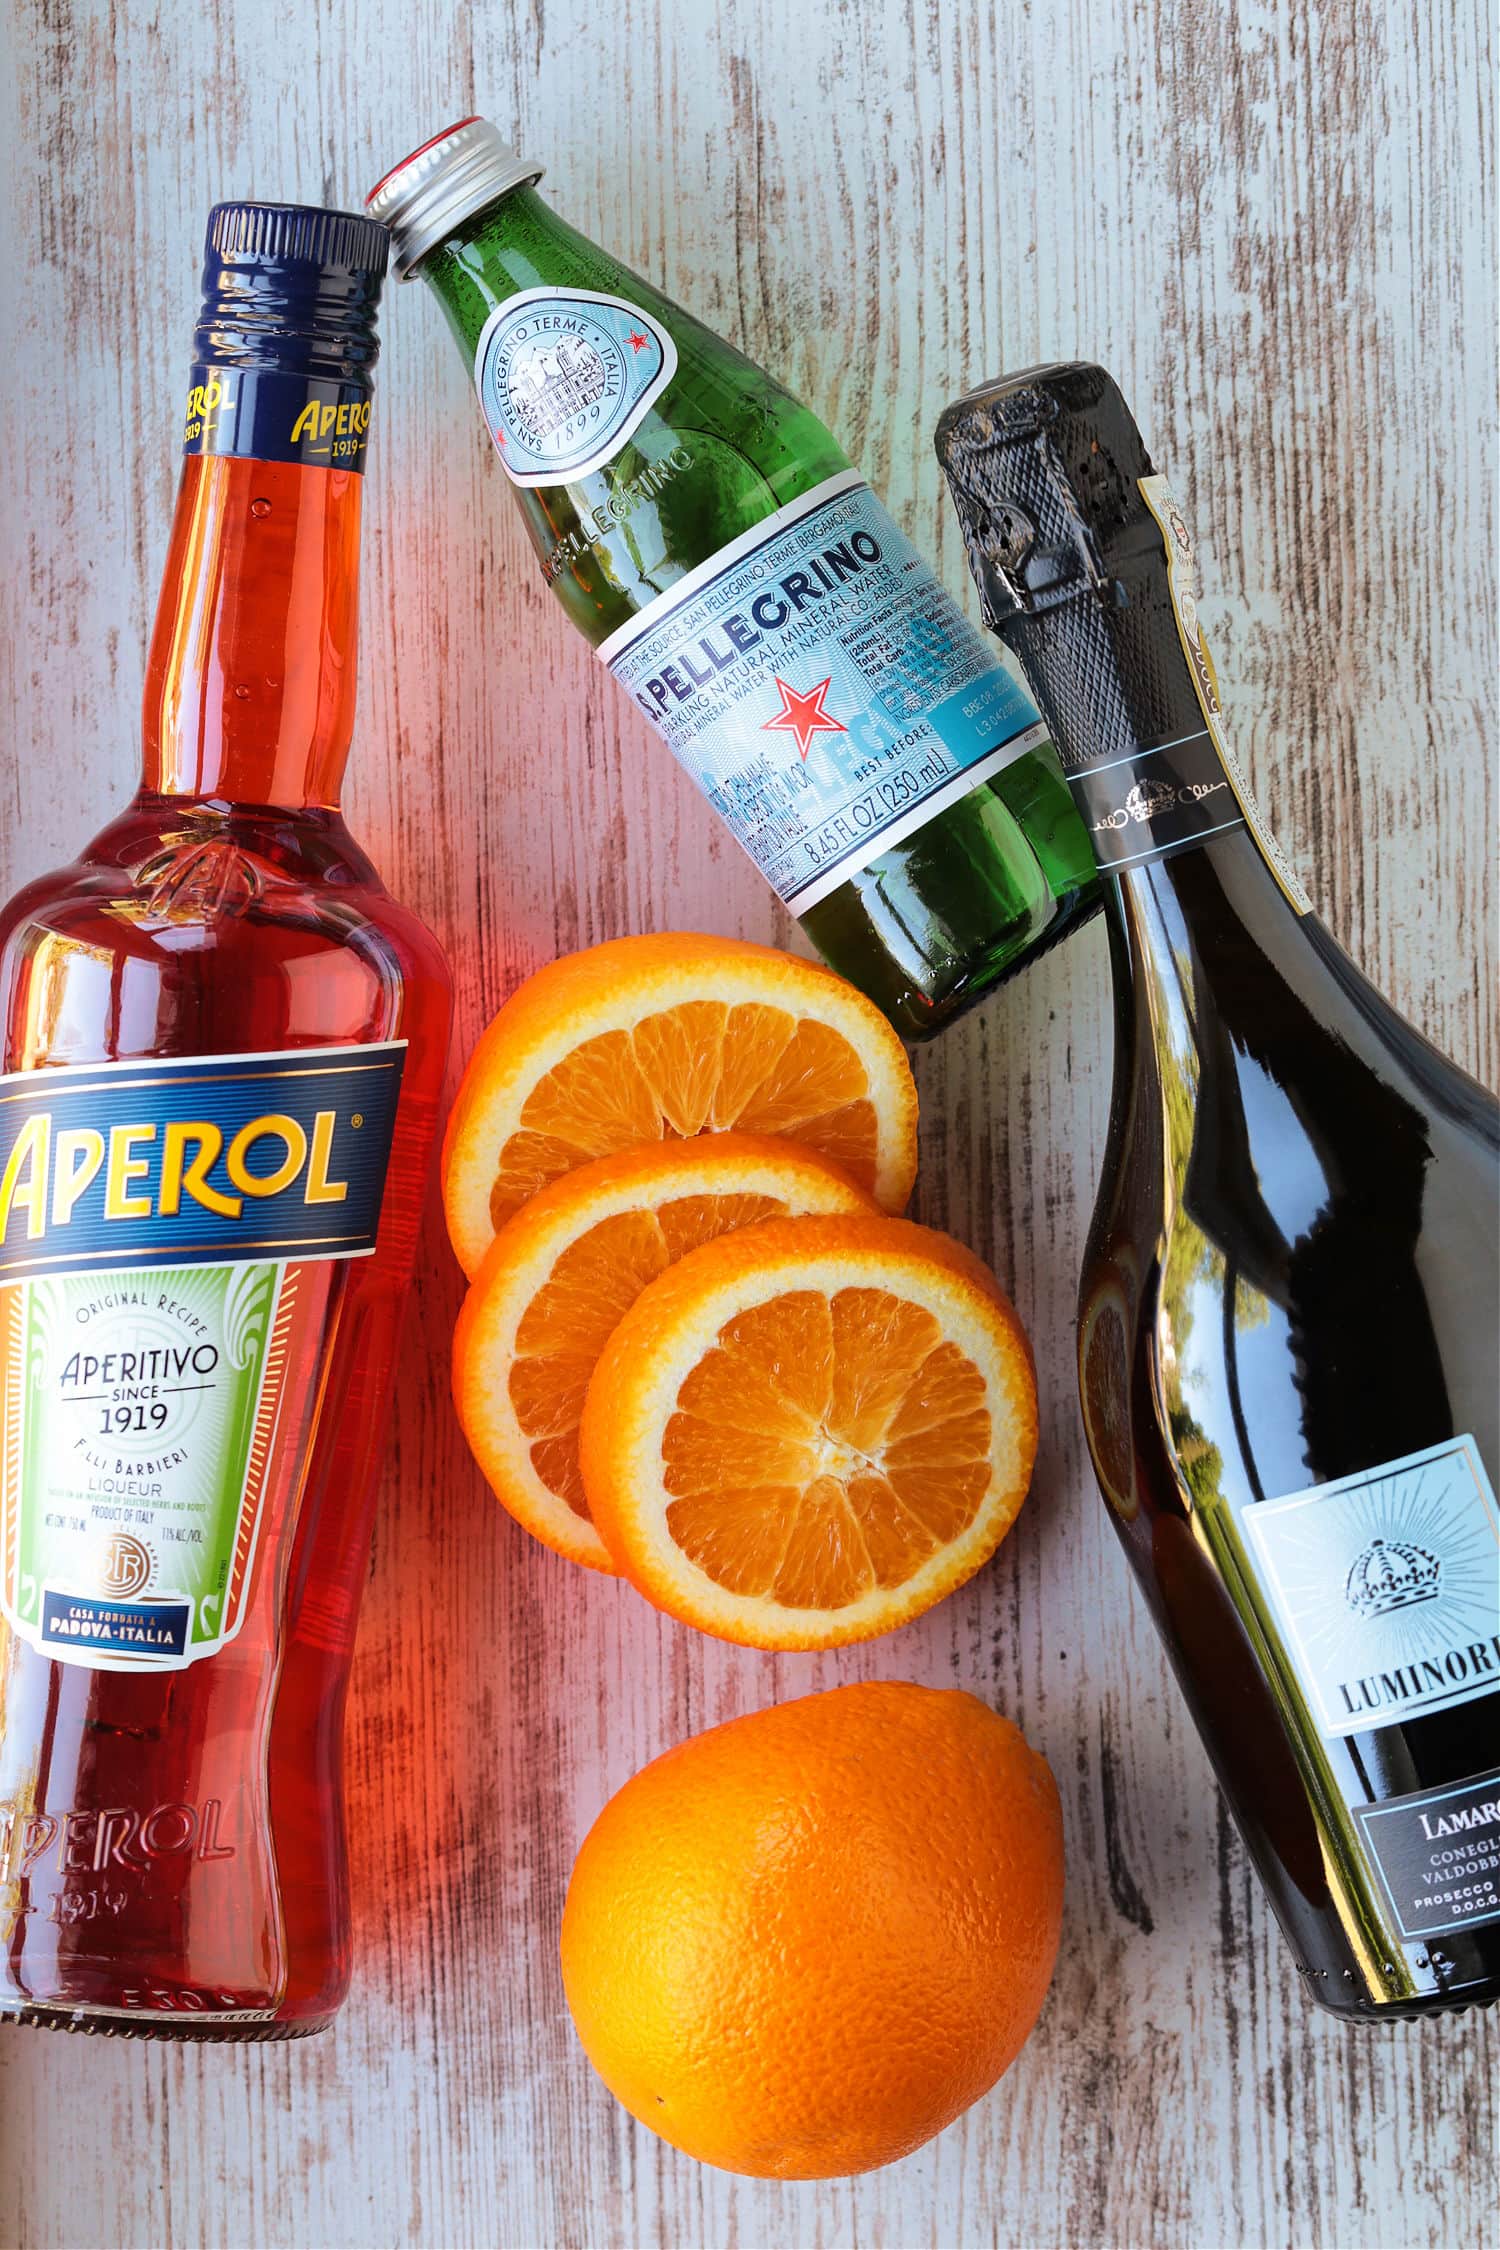 ingredients for making an aperol spritz cocktail